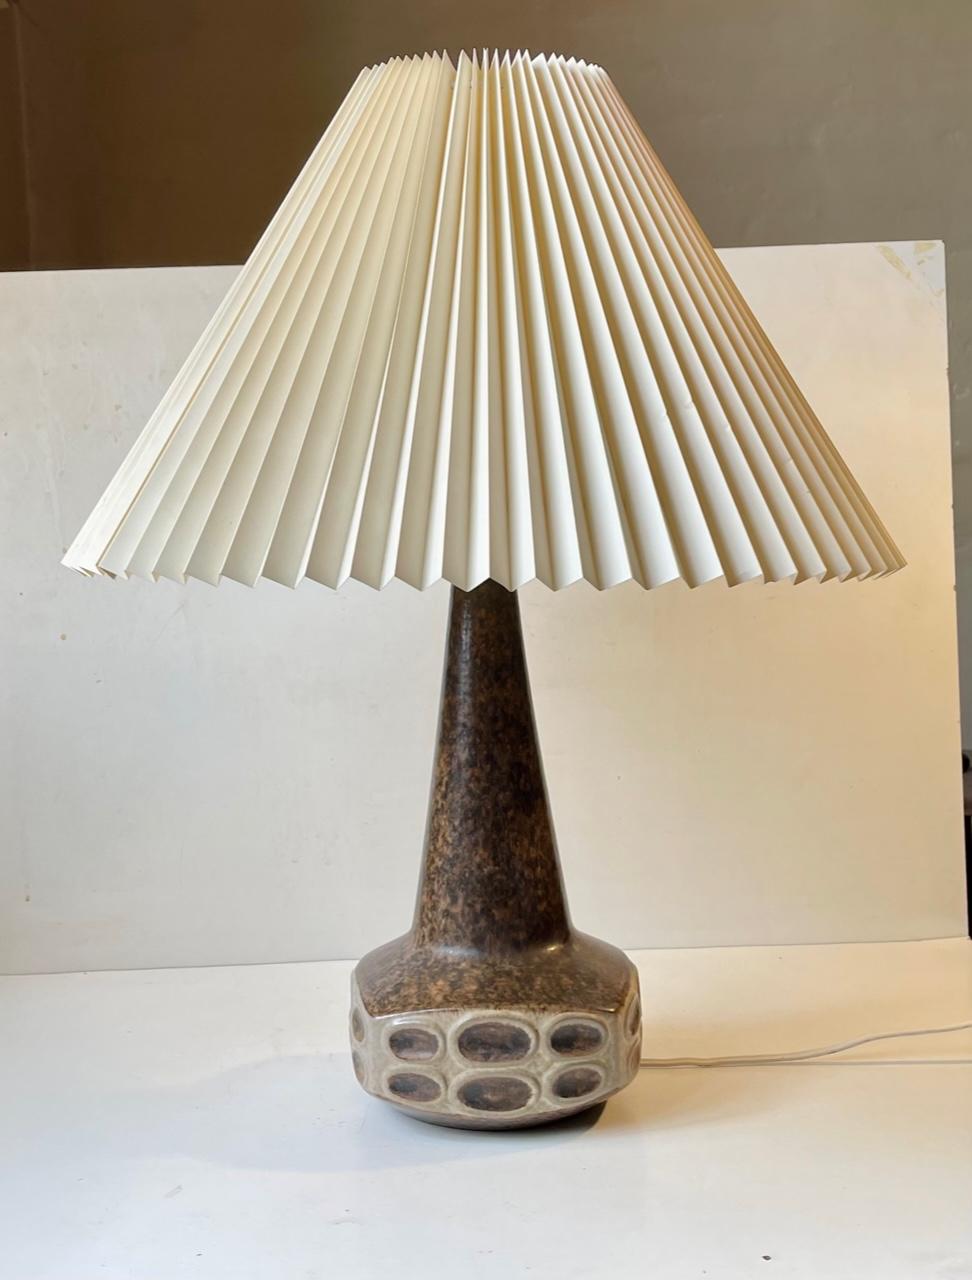 Large ceramic table lamp designed by Marianne Starck for Michael Andersen & Son, Denmark - circa 1970-75. Decorated with earthy brown and pastel glazes. It features its original bakelite socket with pin on/of switch. The height of 22 inches (55 cm)